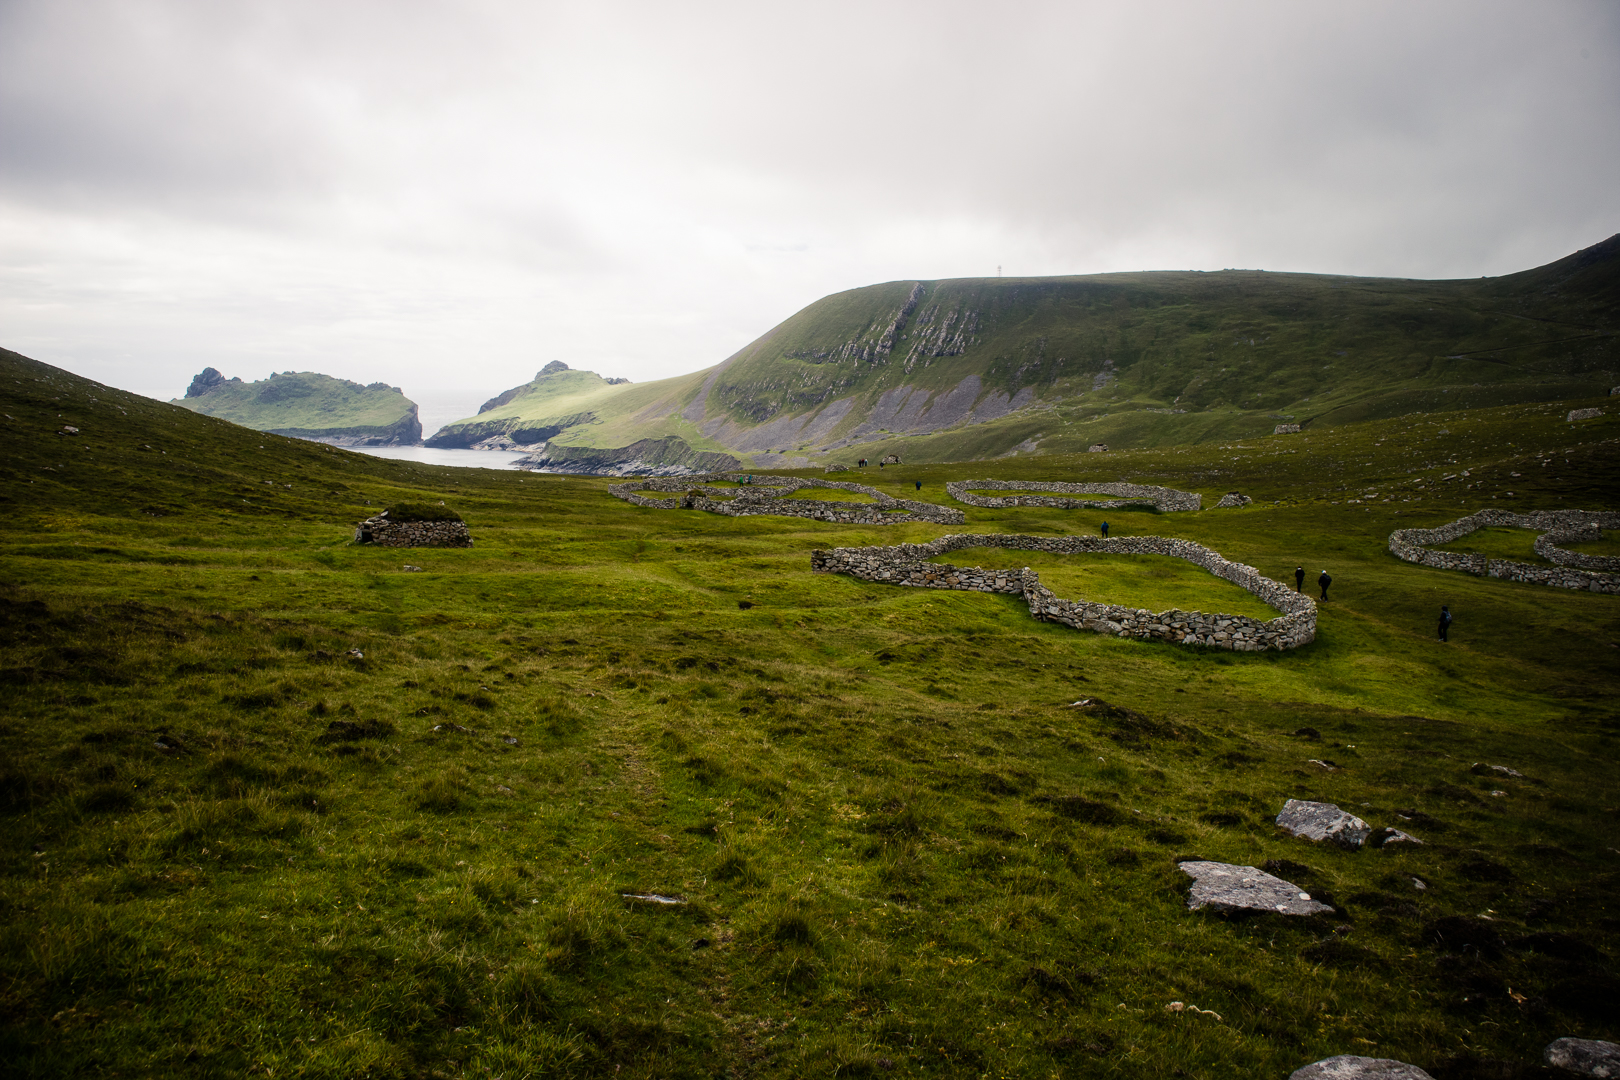 St Kilda, Scotland is one of the best UNESCO heritage sites in Europe. Read the article to discover more natural sites in Europe, and a list of world heritage in Europe to add to your bucket list. #UNESCO #unescosites #unescositeseurope #europeunesco #scotlandunesco #scotland